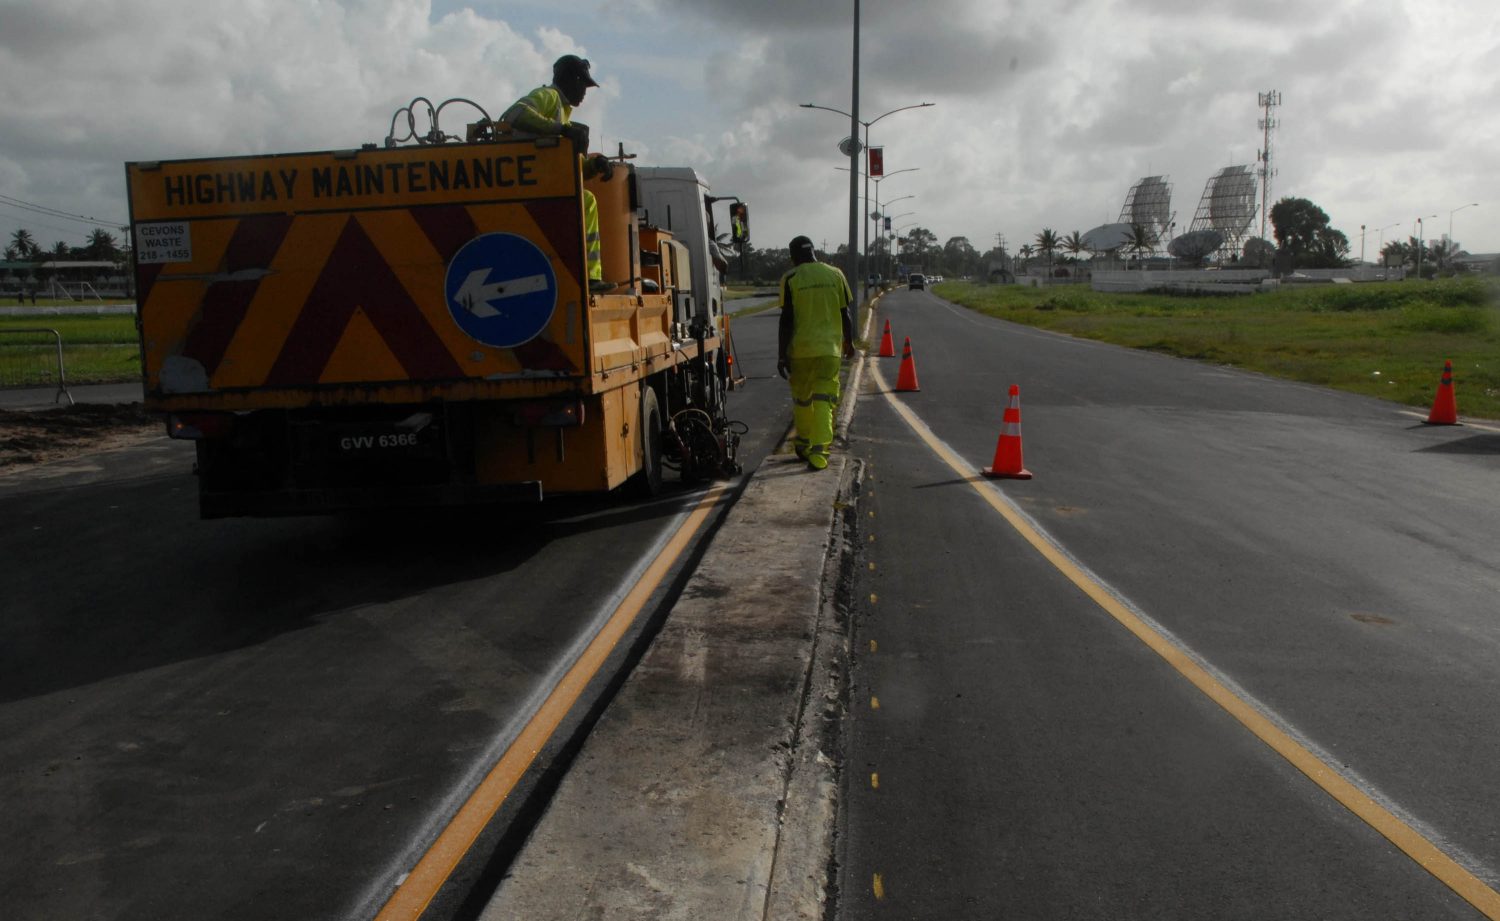 Workmen last week were putting the finishing touches to the road marking of the Carifesta Avenue/Vlissengen Road Roundabout Project ahead of today’s scheduled official opening. The roundabout is expected to take account of considerations of both smooth traffic flow and safety though the newness of the service may well pose some challenges for drivers seeking to negotiate if.